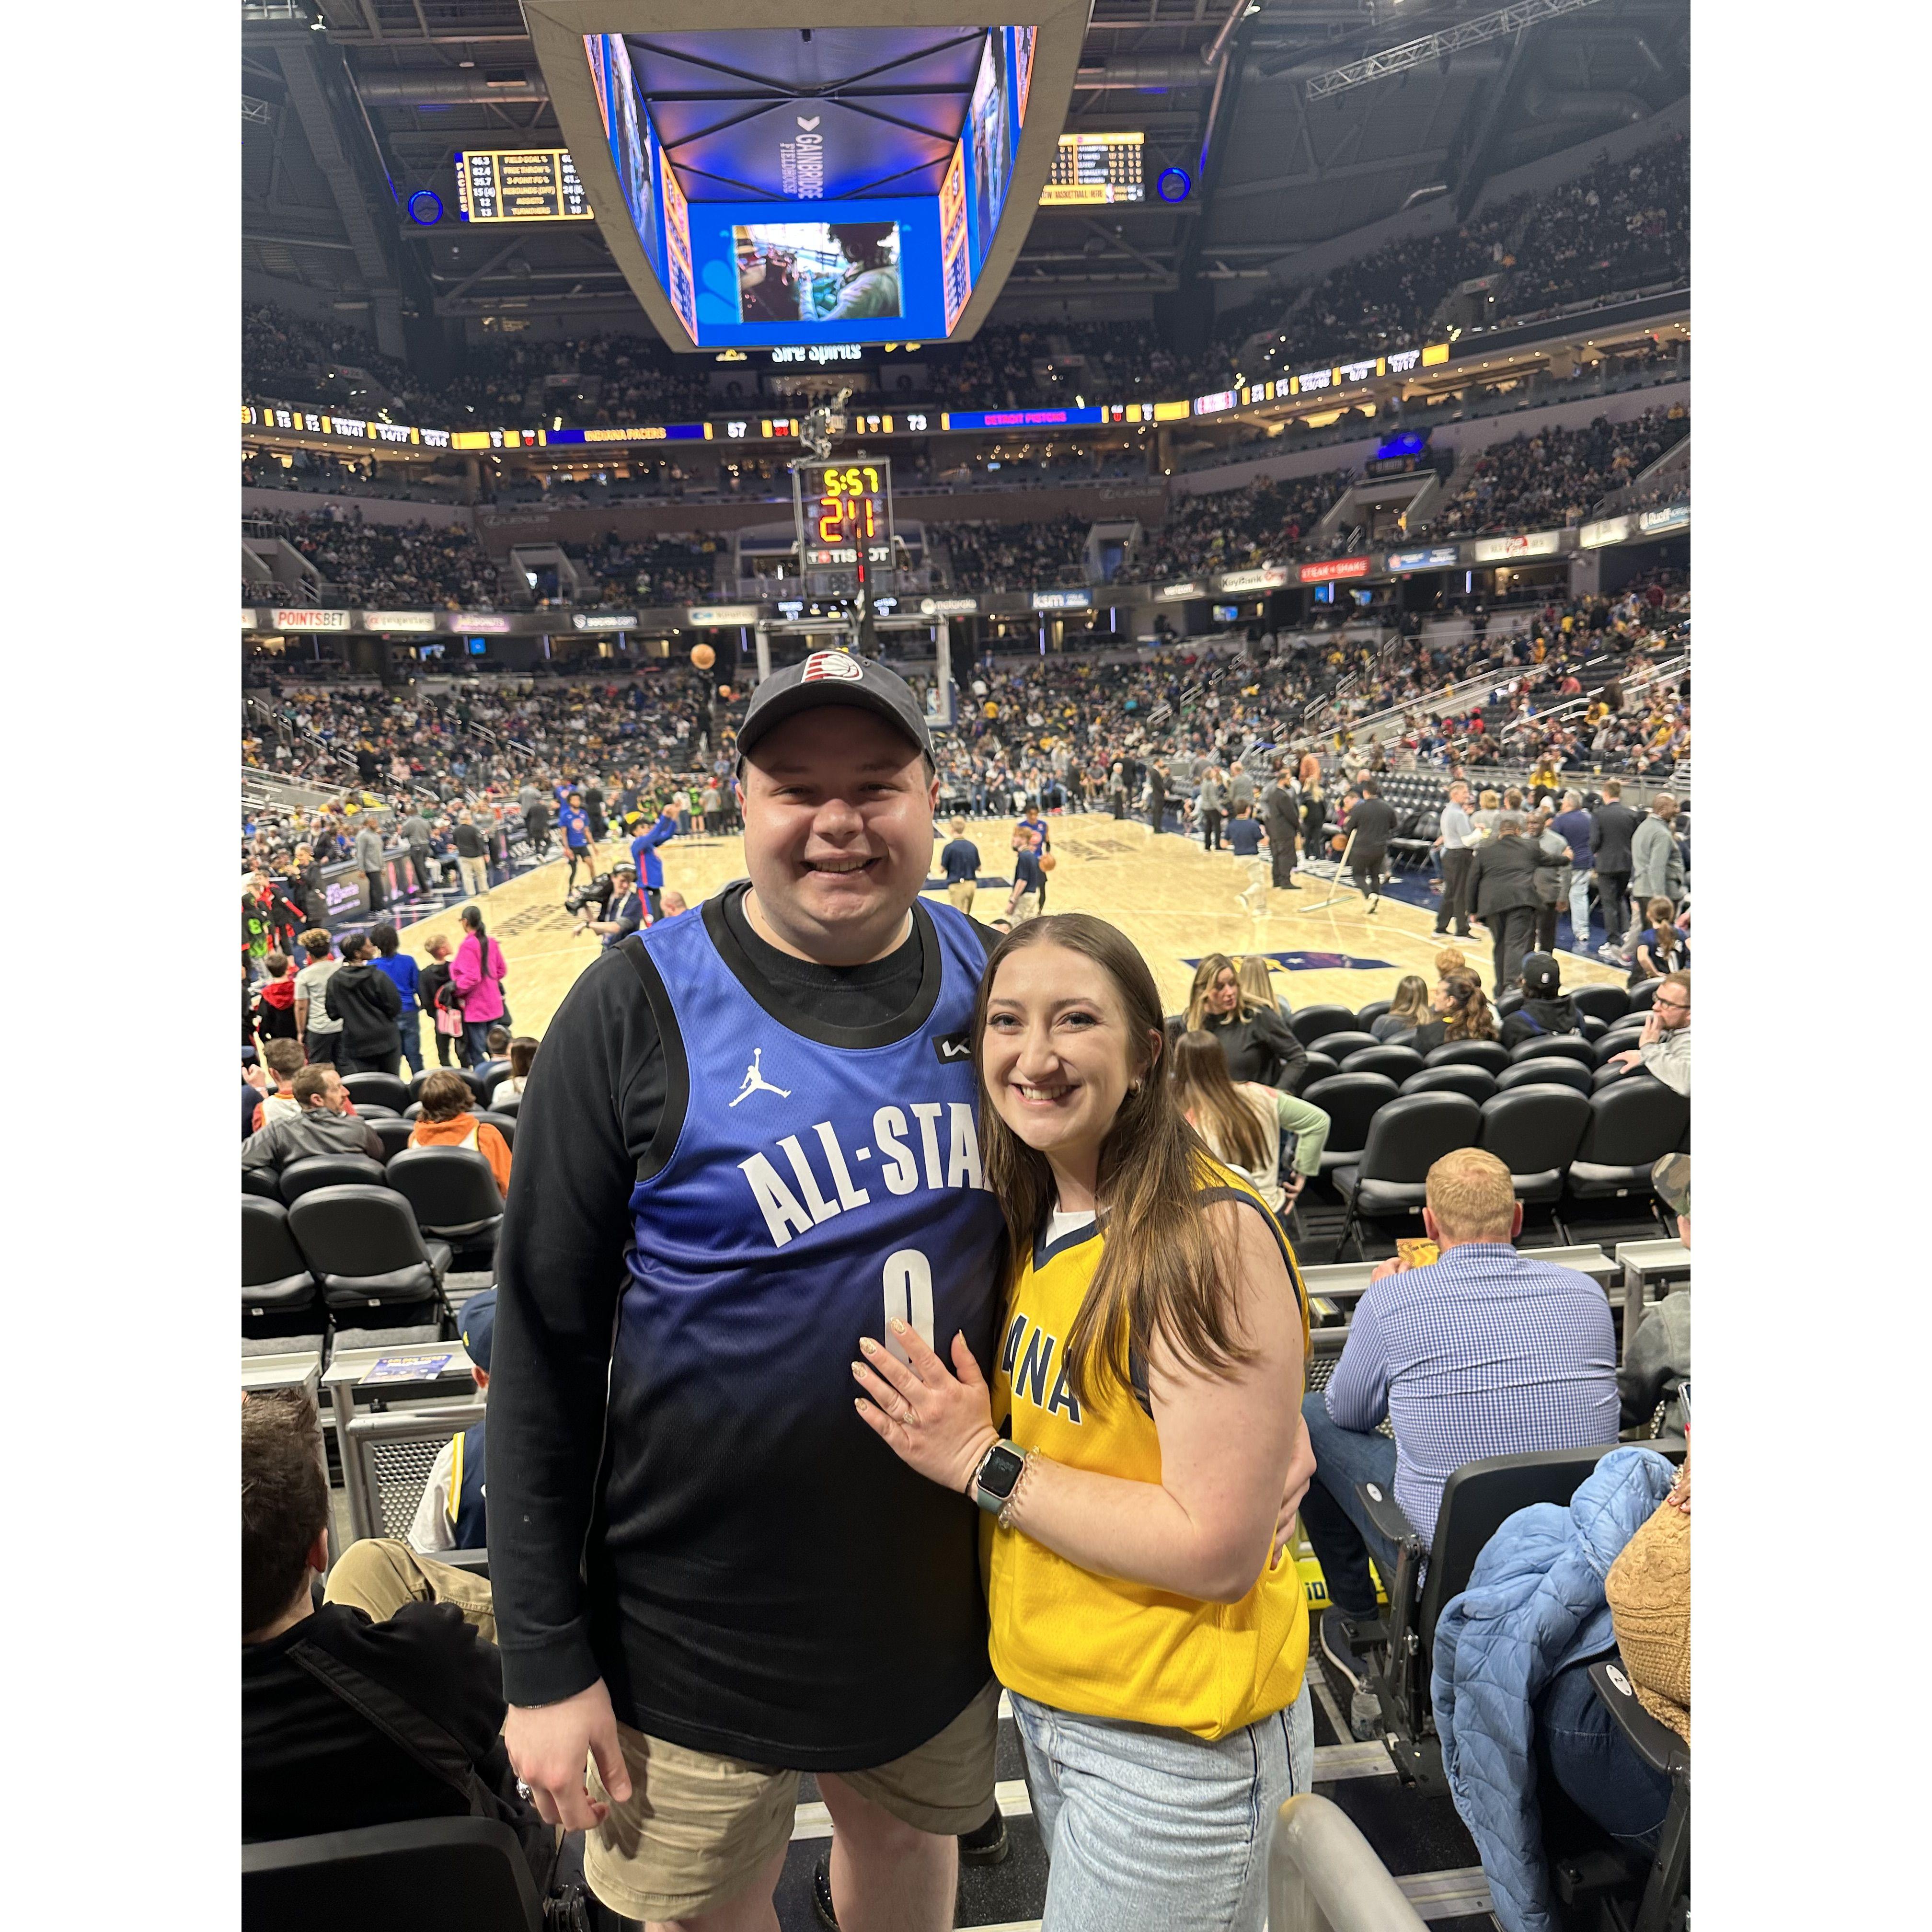 Snapped next to where our seats were for the Pacers Season Fall '22-Spring '23